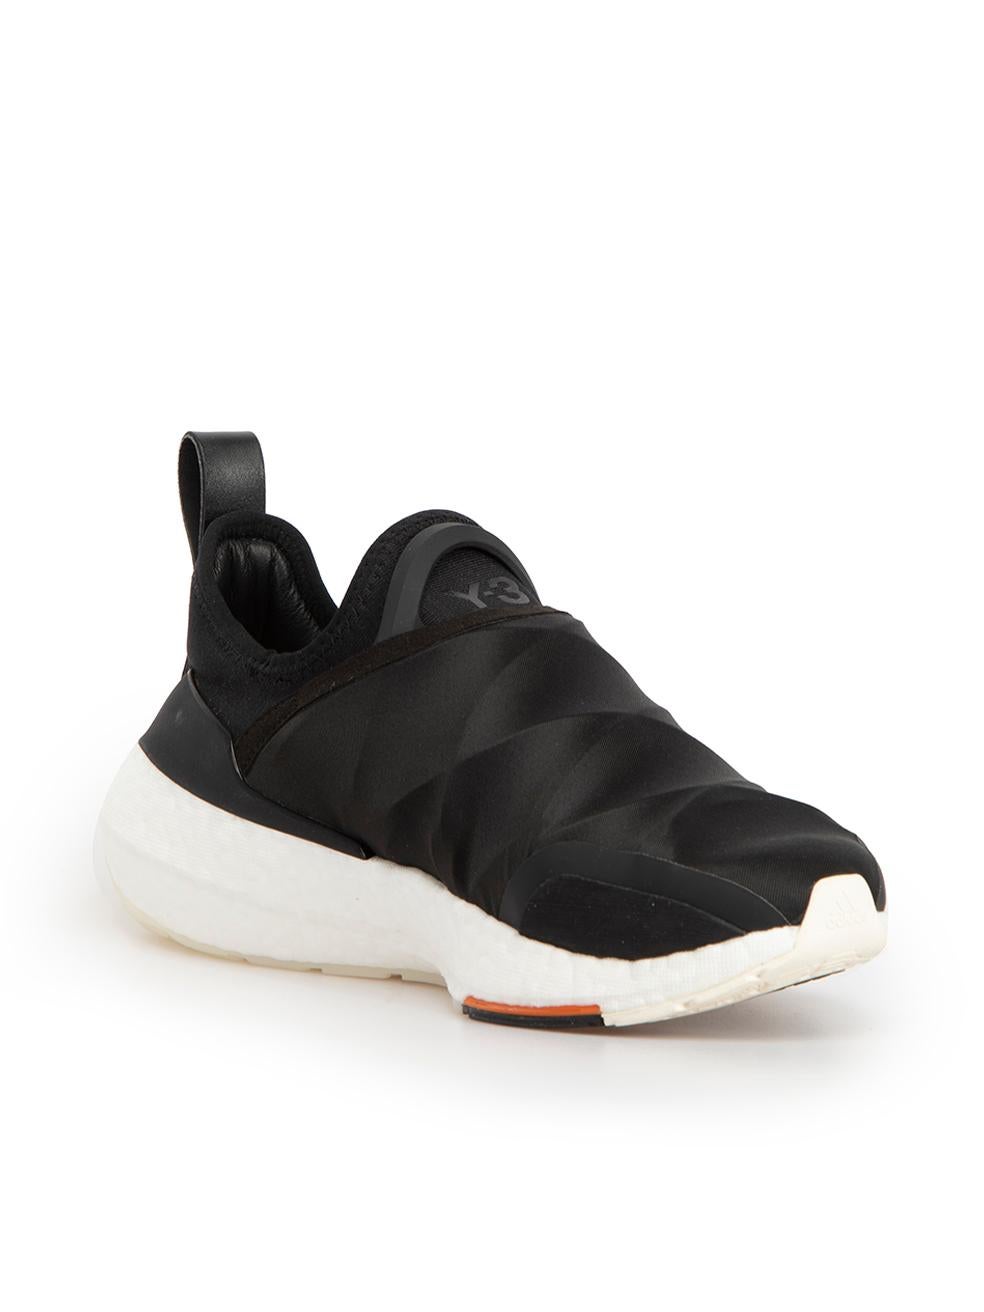 CONDITION is Never Worn. No visible wear to shoes is evident on this used Y-3 designer resale item. These shoes come in original box.



Details


Black

Synthetic material

White chunky sole

Orange accent detail on the sides

Y-3 Logo on the